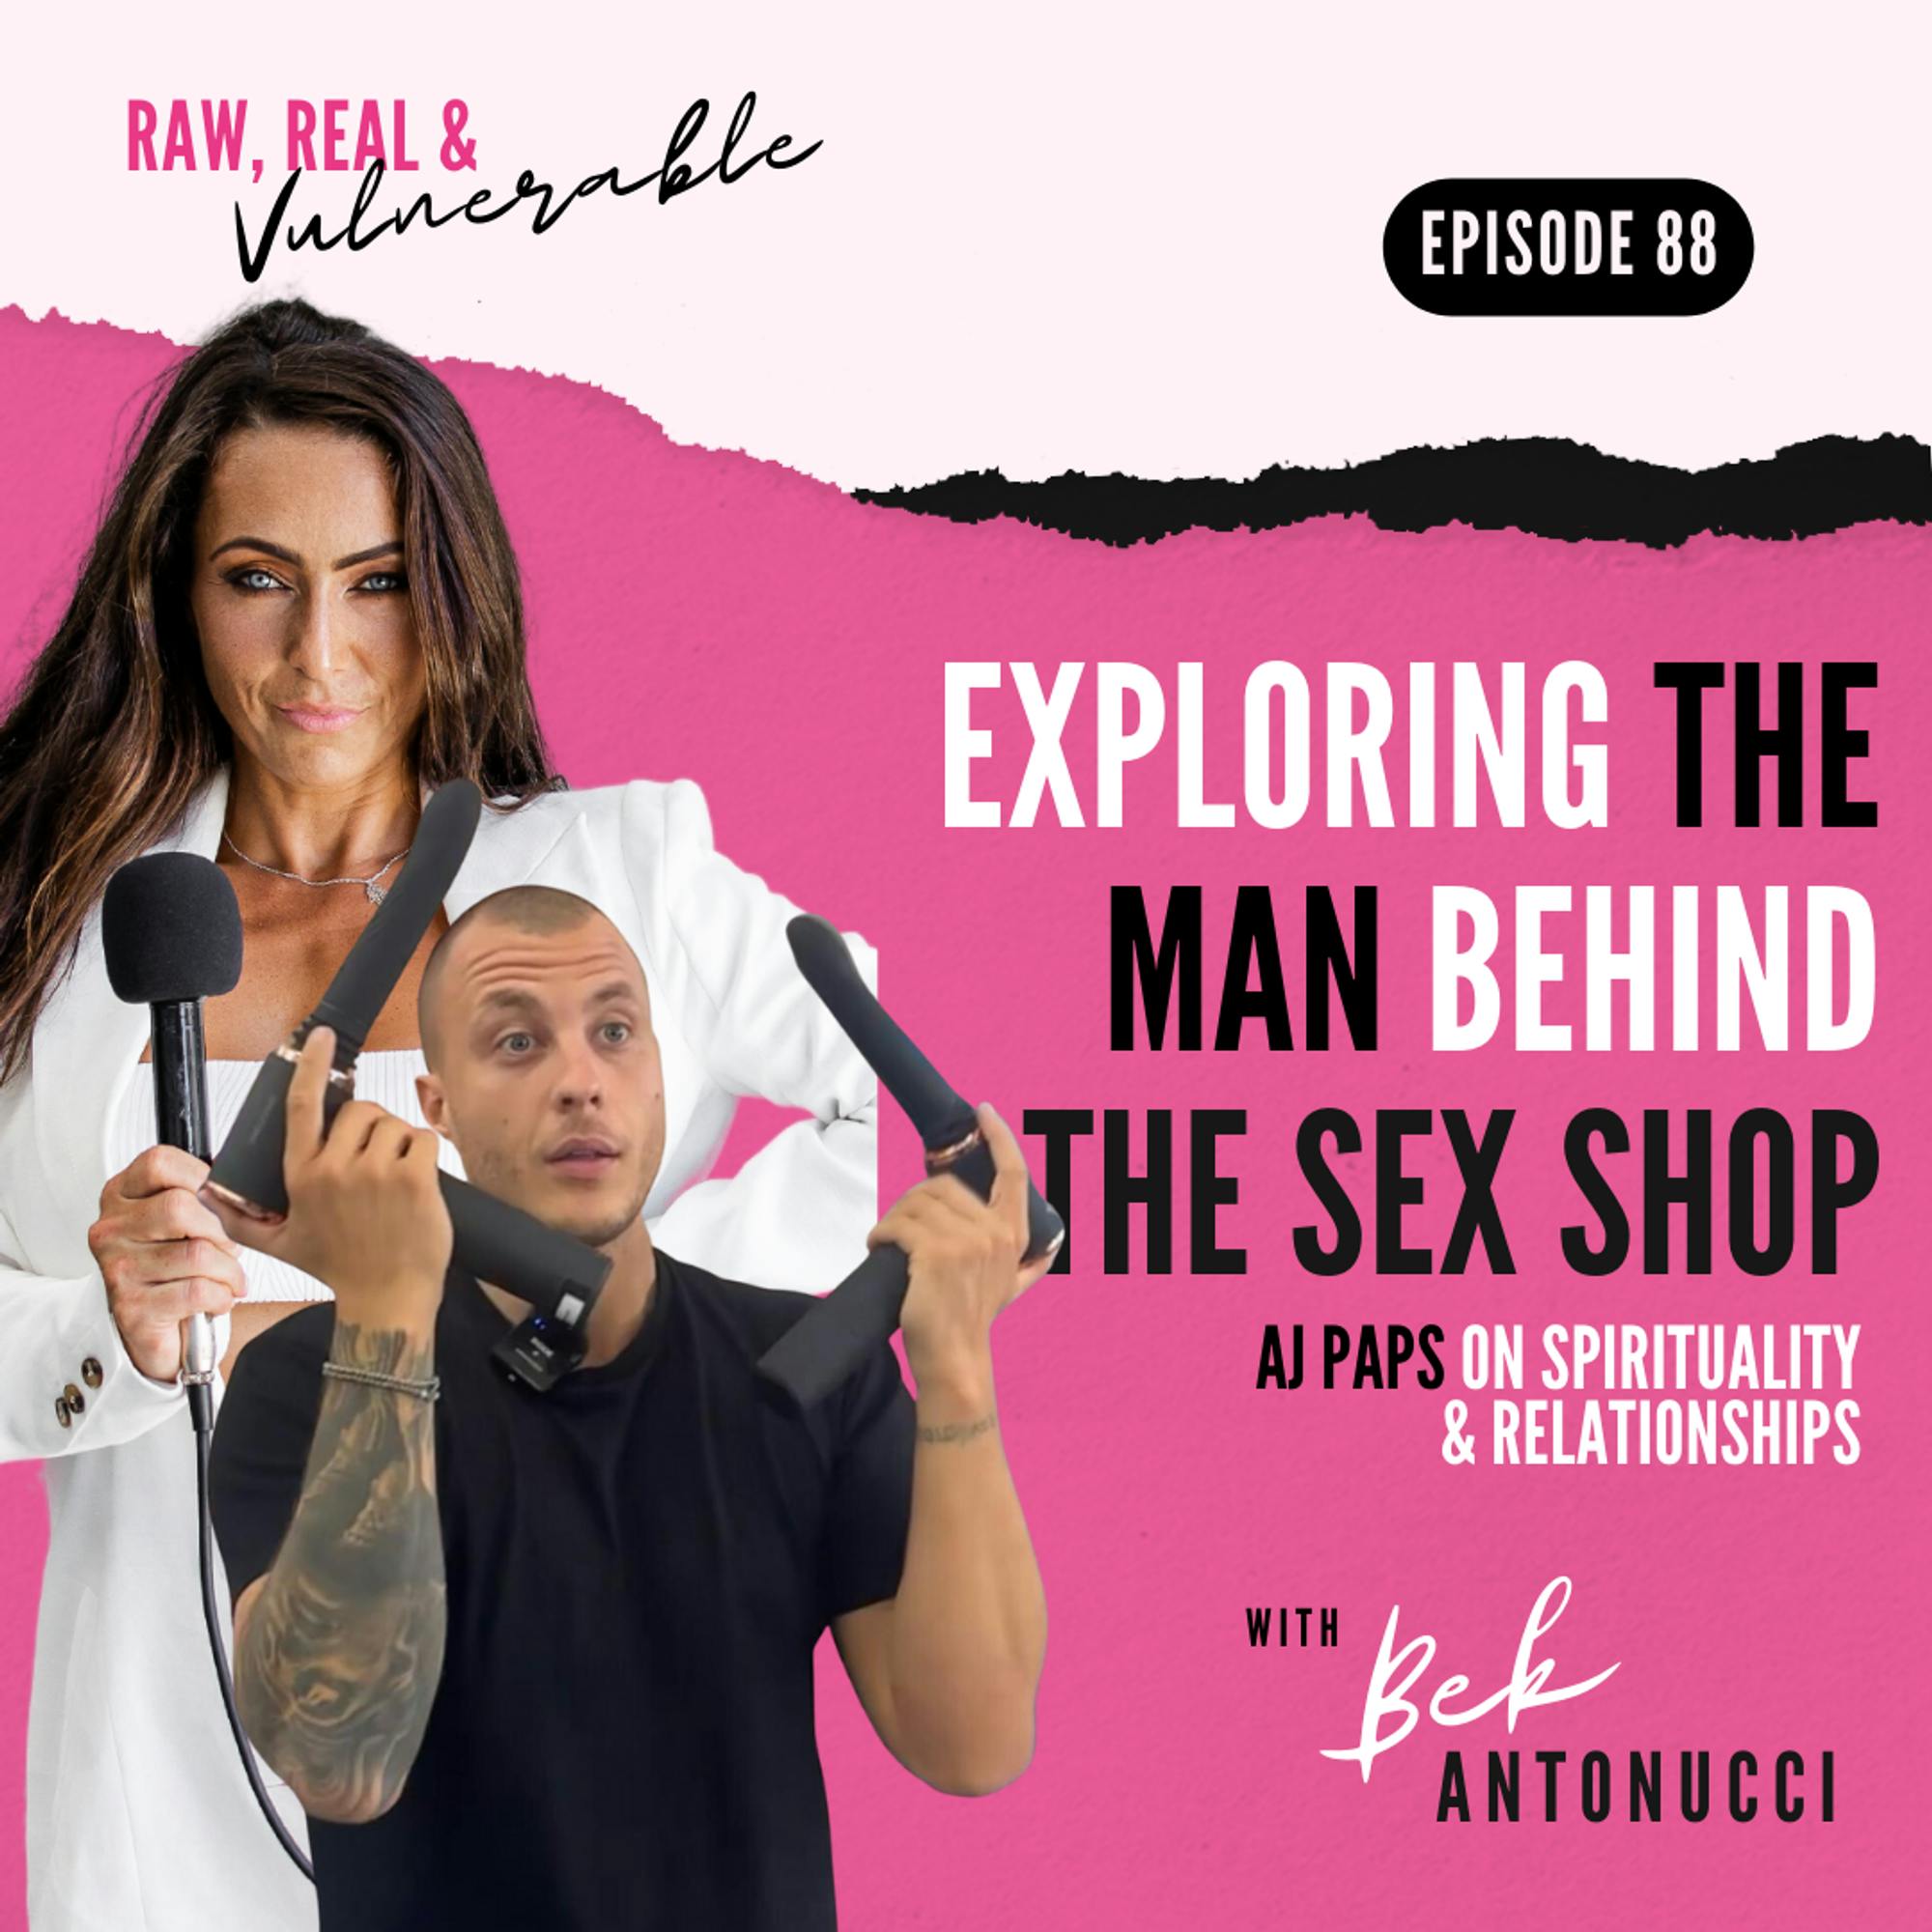 Exploring the Man Behind the Sex Shop: AJ Paps on Spirituality & Relationships